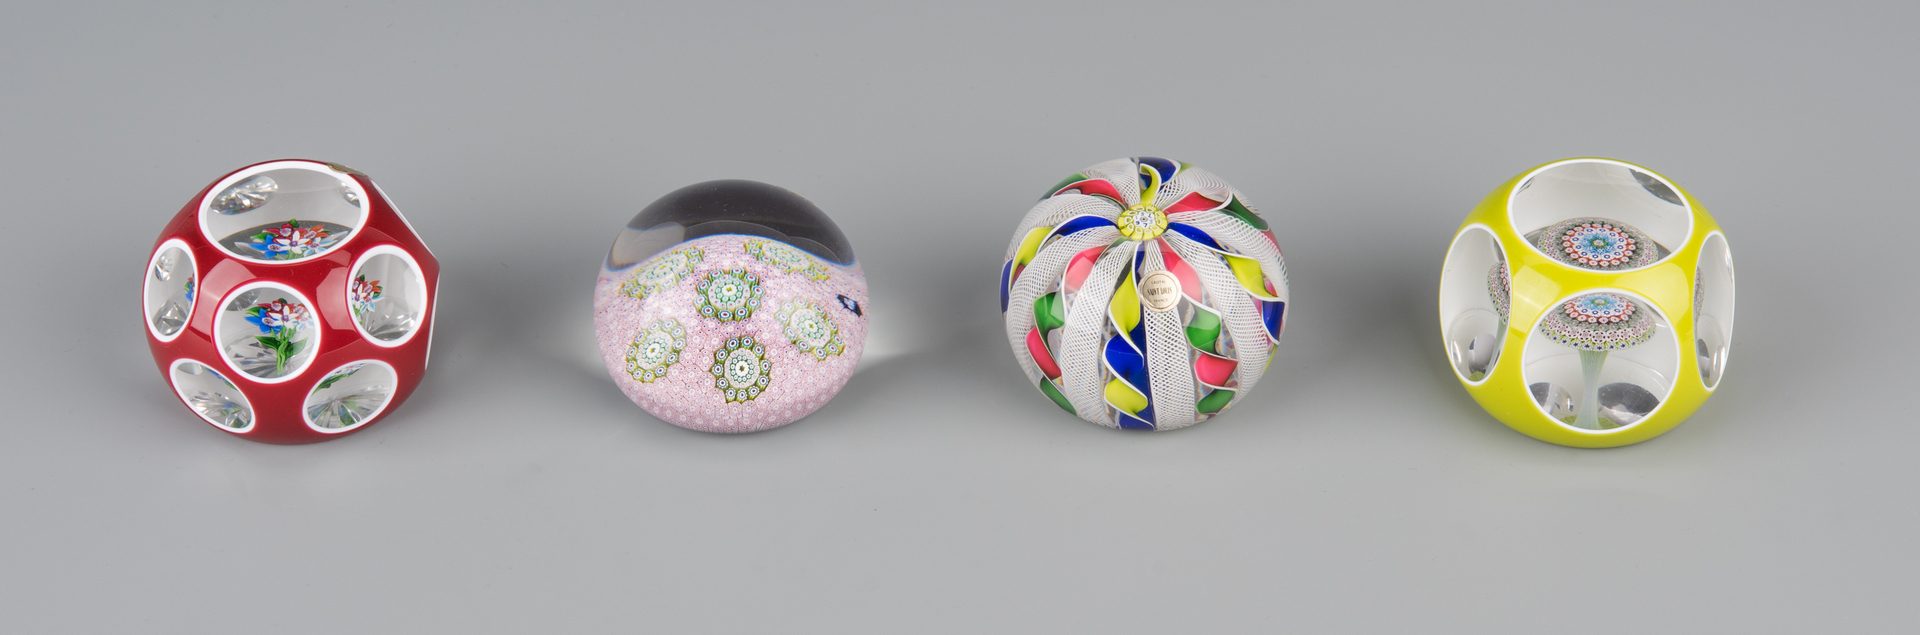 Lot 687: Group of 7 Saint Louis France Paperweights